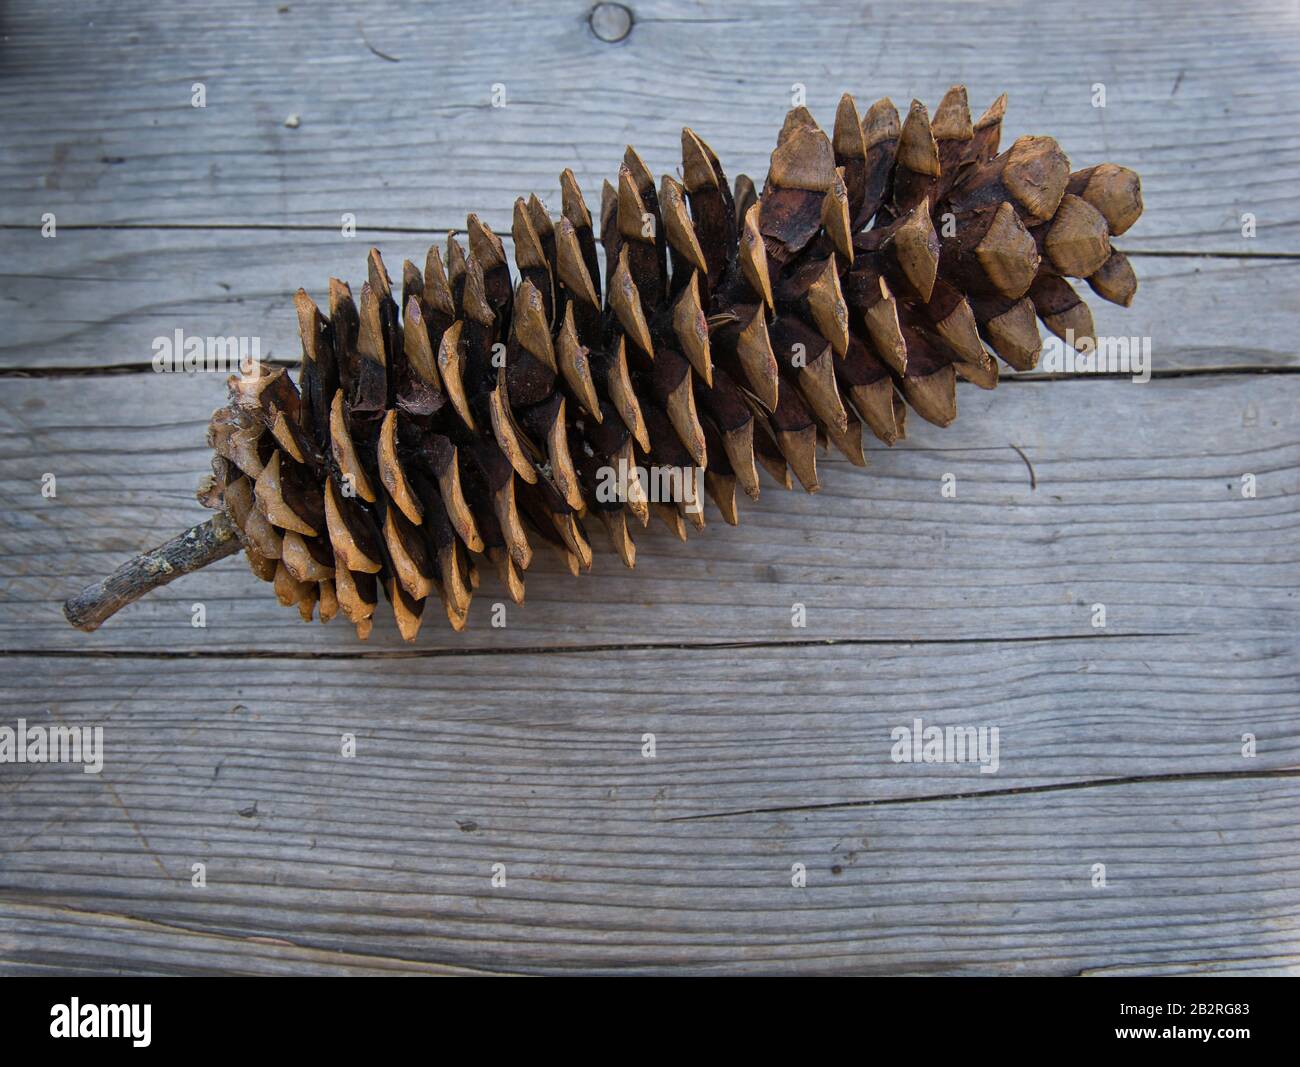 The huge cone from a sequoia on a wooden board Stock Photo